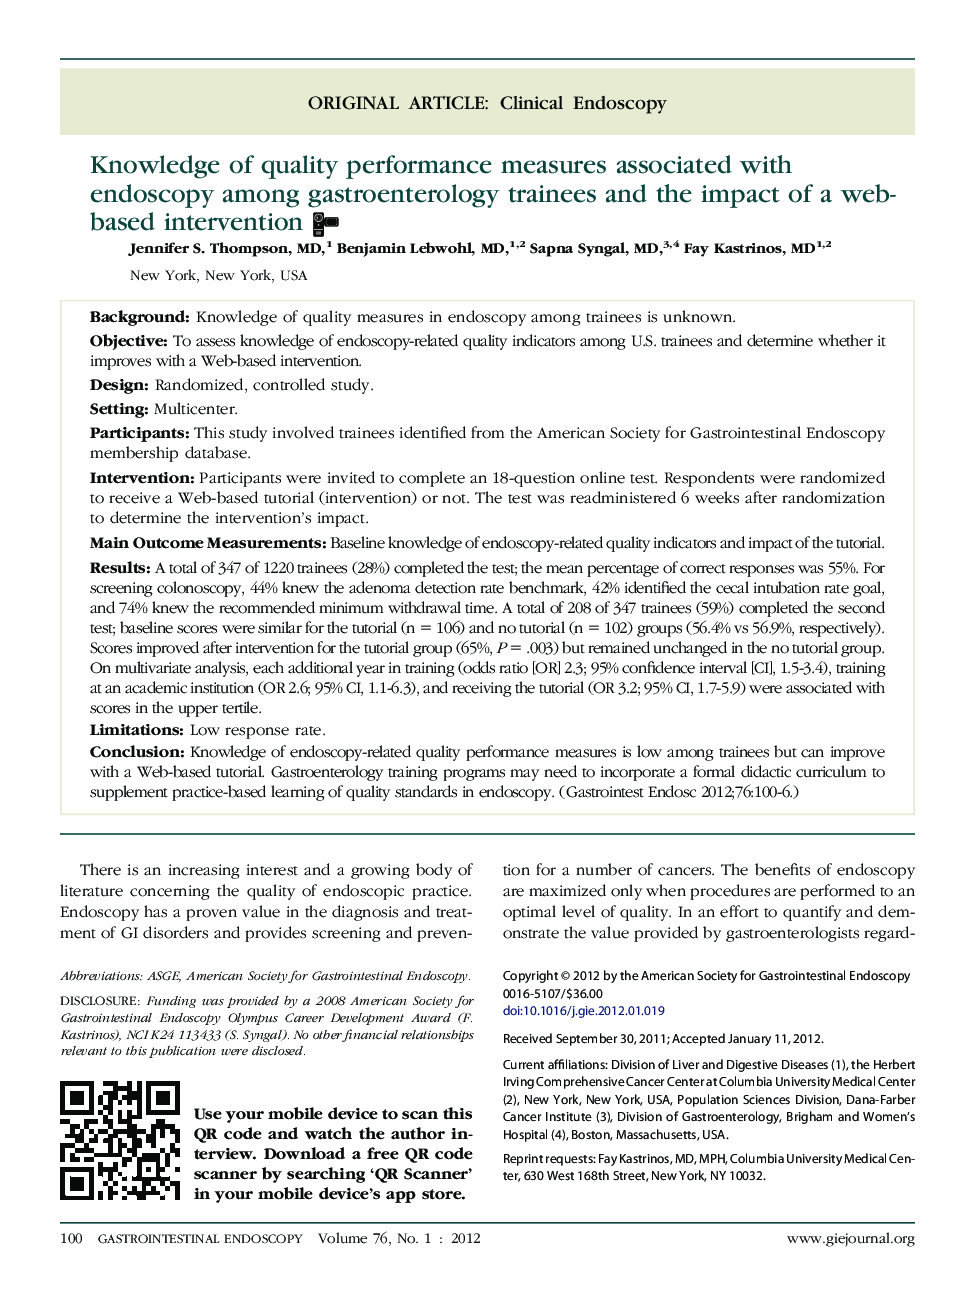 Knowledge of quality performance measures associated with endoscopy among gastroenterology trainees and the impact of a web-based intervention